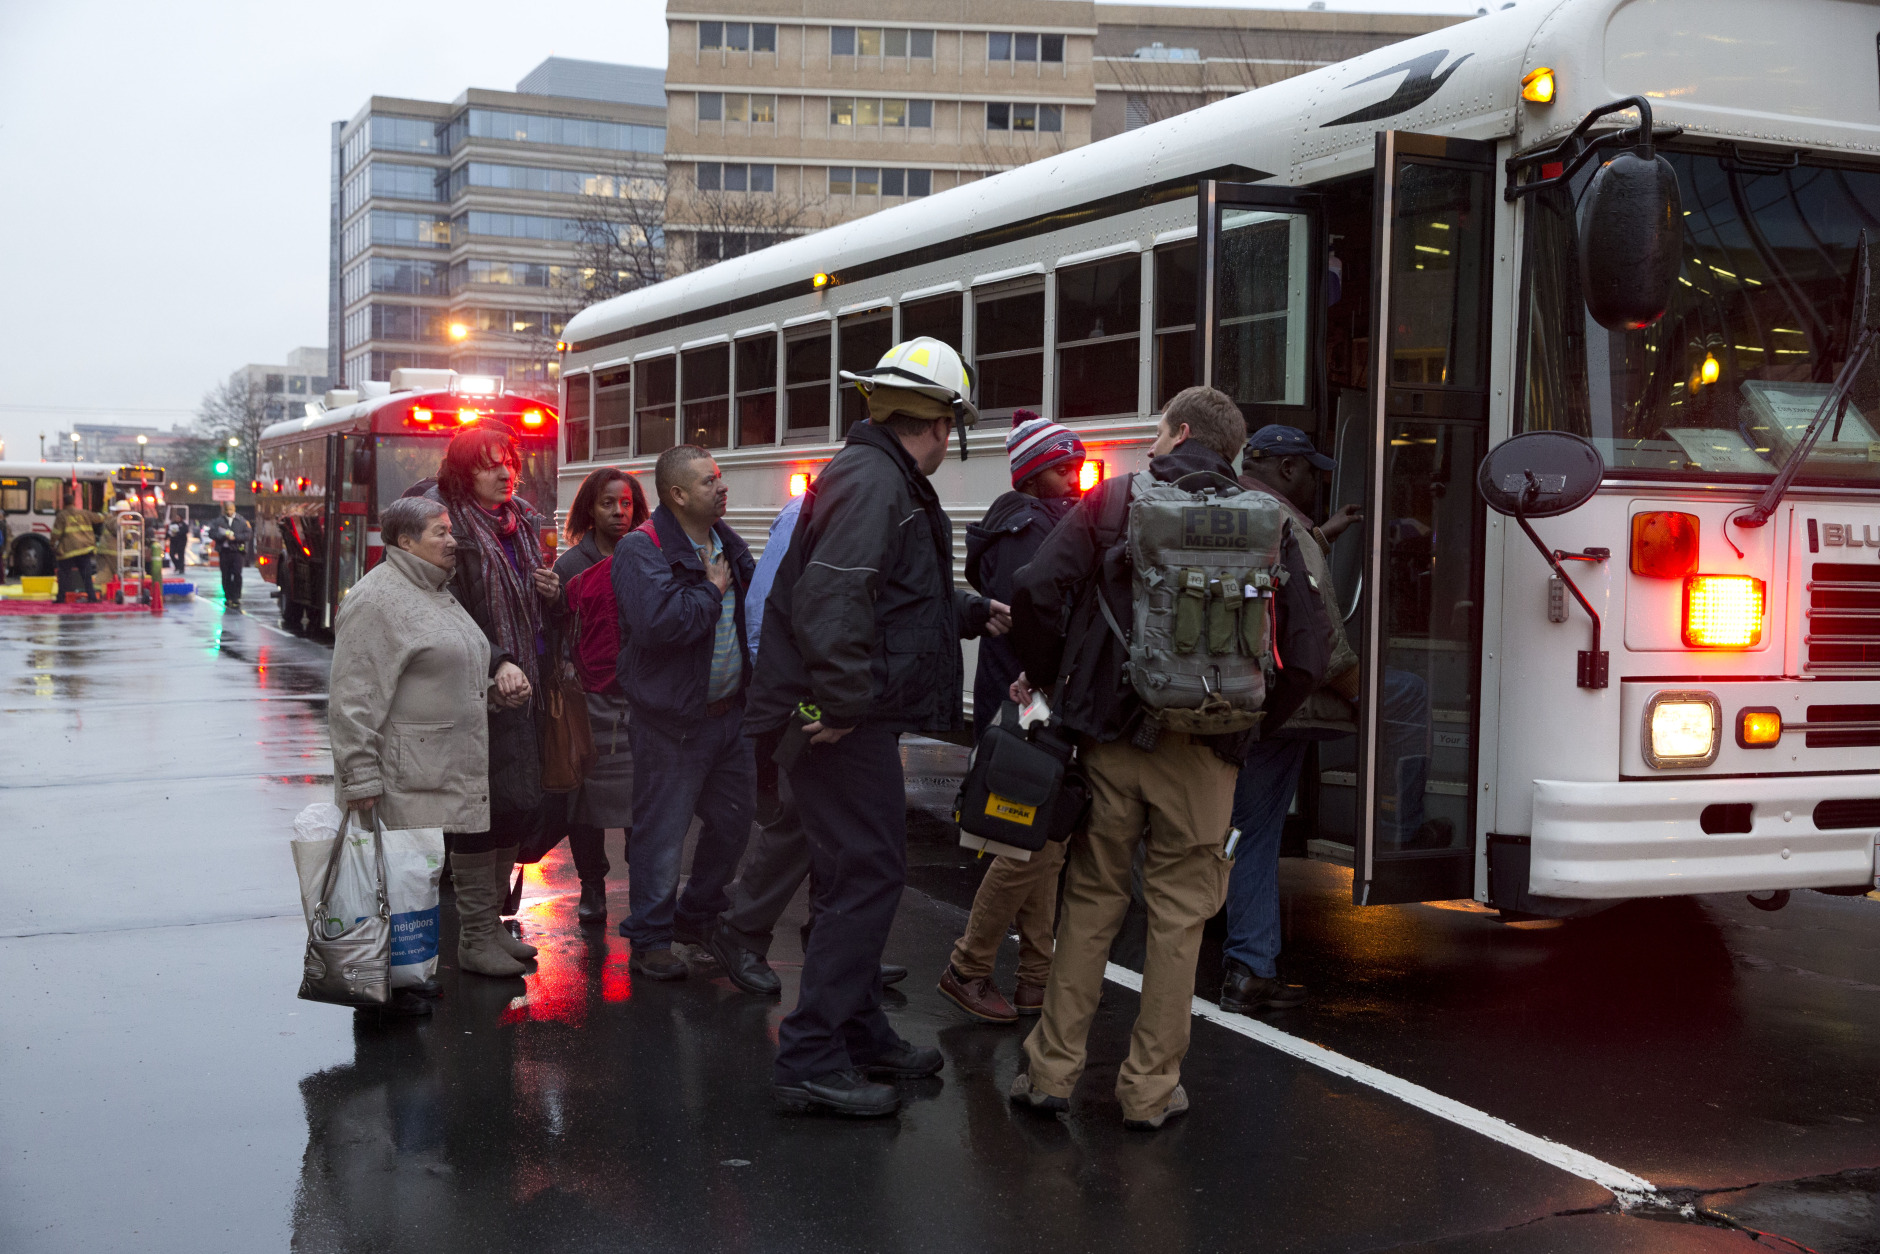 Coughing people are taken onto a bus as they are evacuated from a smoke filled Metro train Monday, Jan. 12, 2015.  (AP Photo/Jacquelyn Martin)